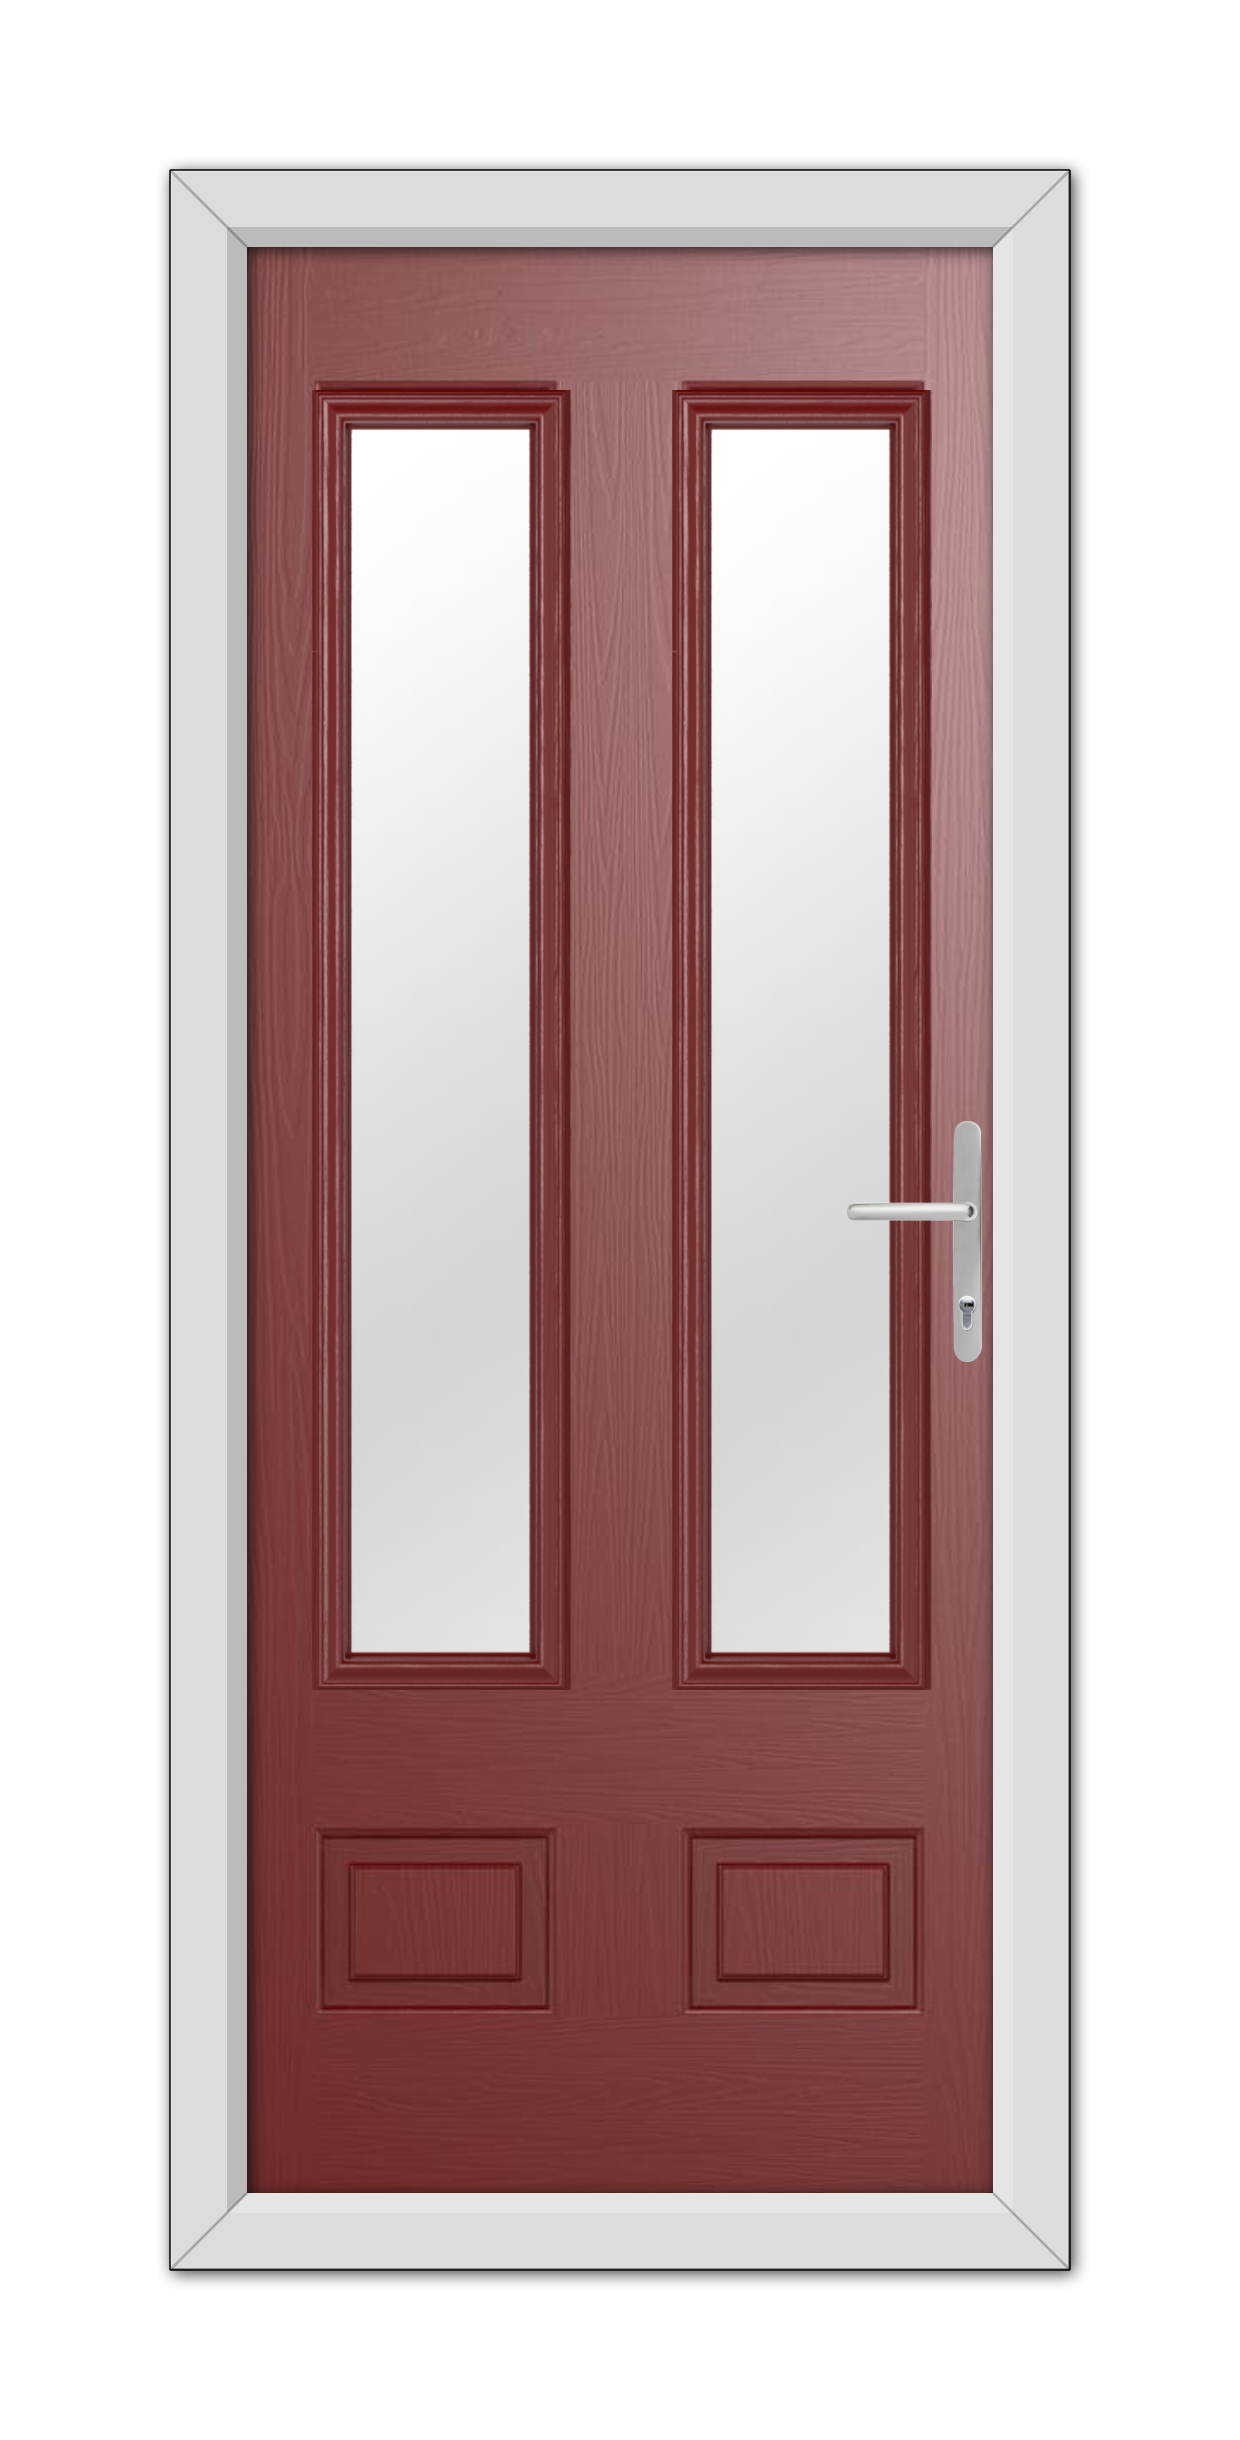 Double wooden doors in a Red Aston Glazed 2 Composite Door 48mm Timber Core finish with vertical glass panels, framed in white.